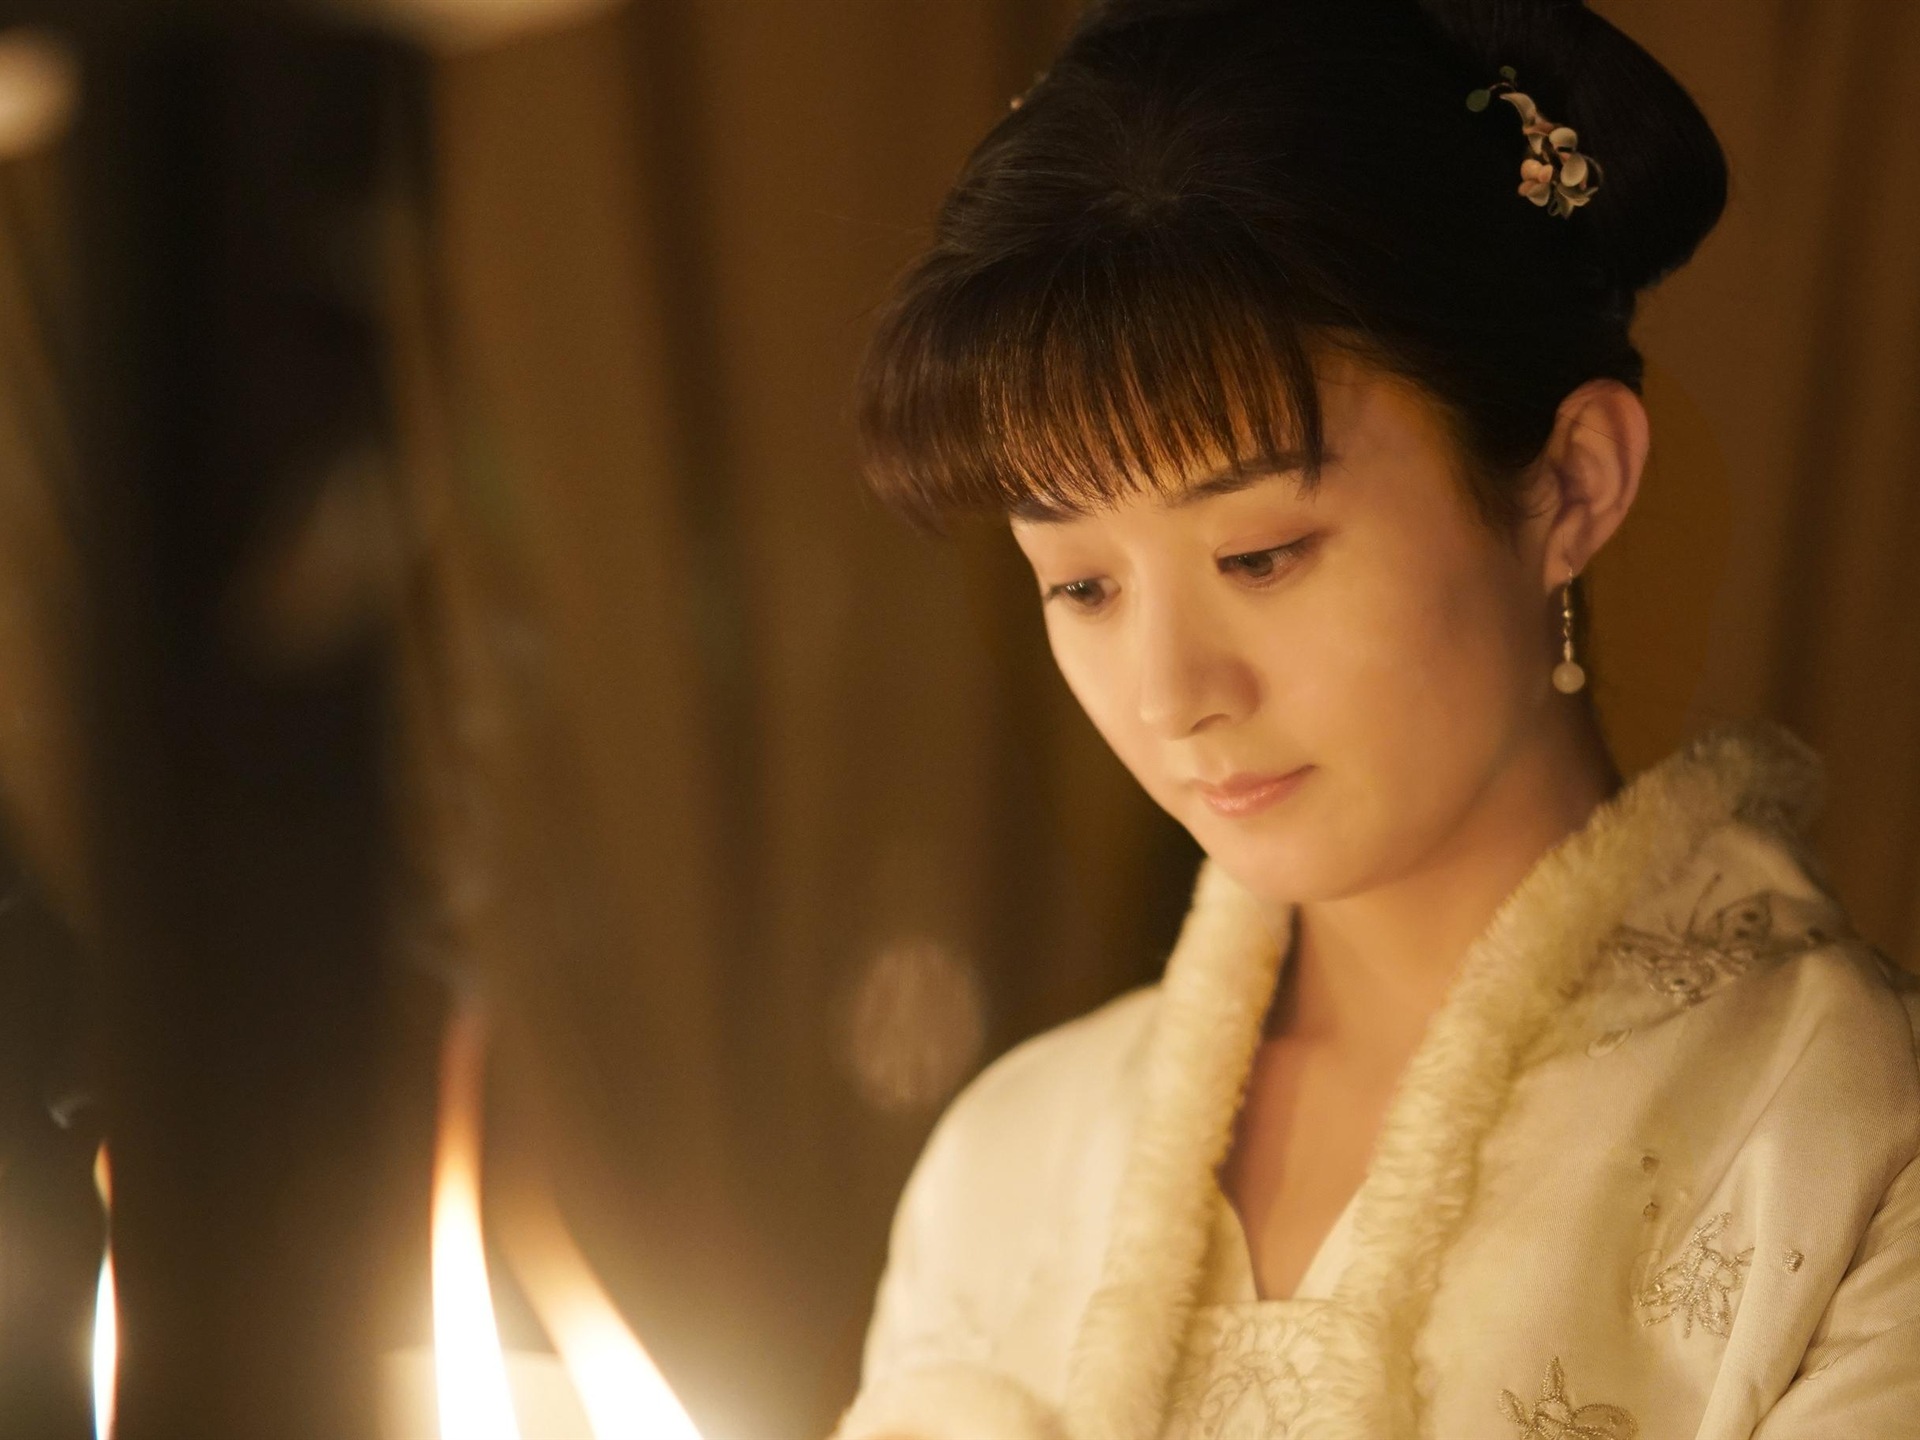 The Story Of MingLan, TV series HD wallpapers #41 - 1920x1440